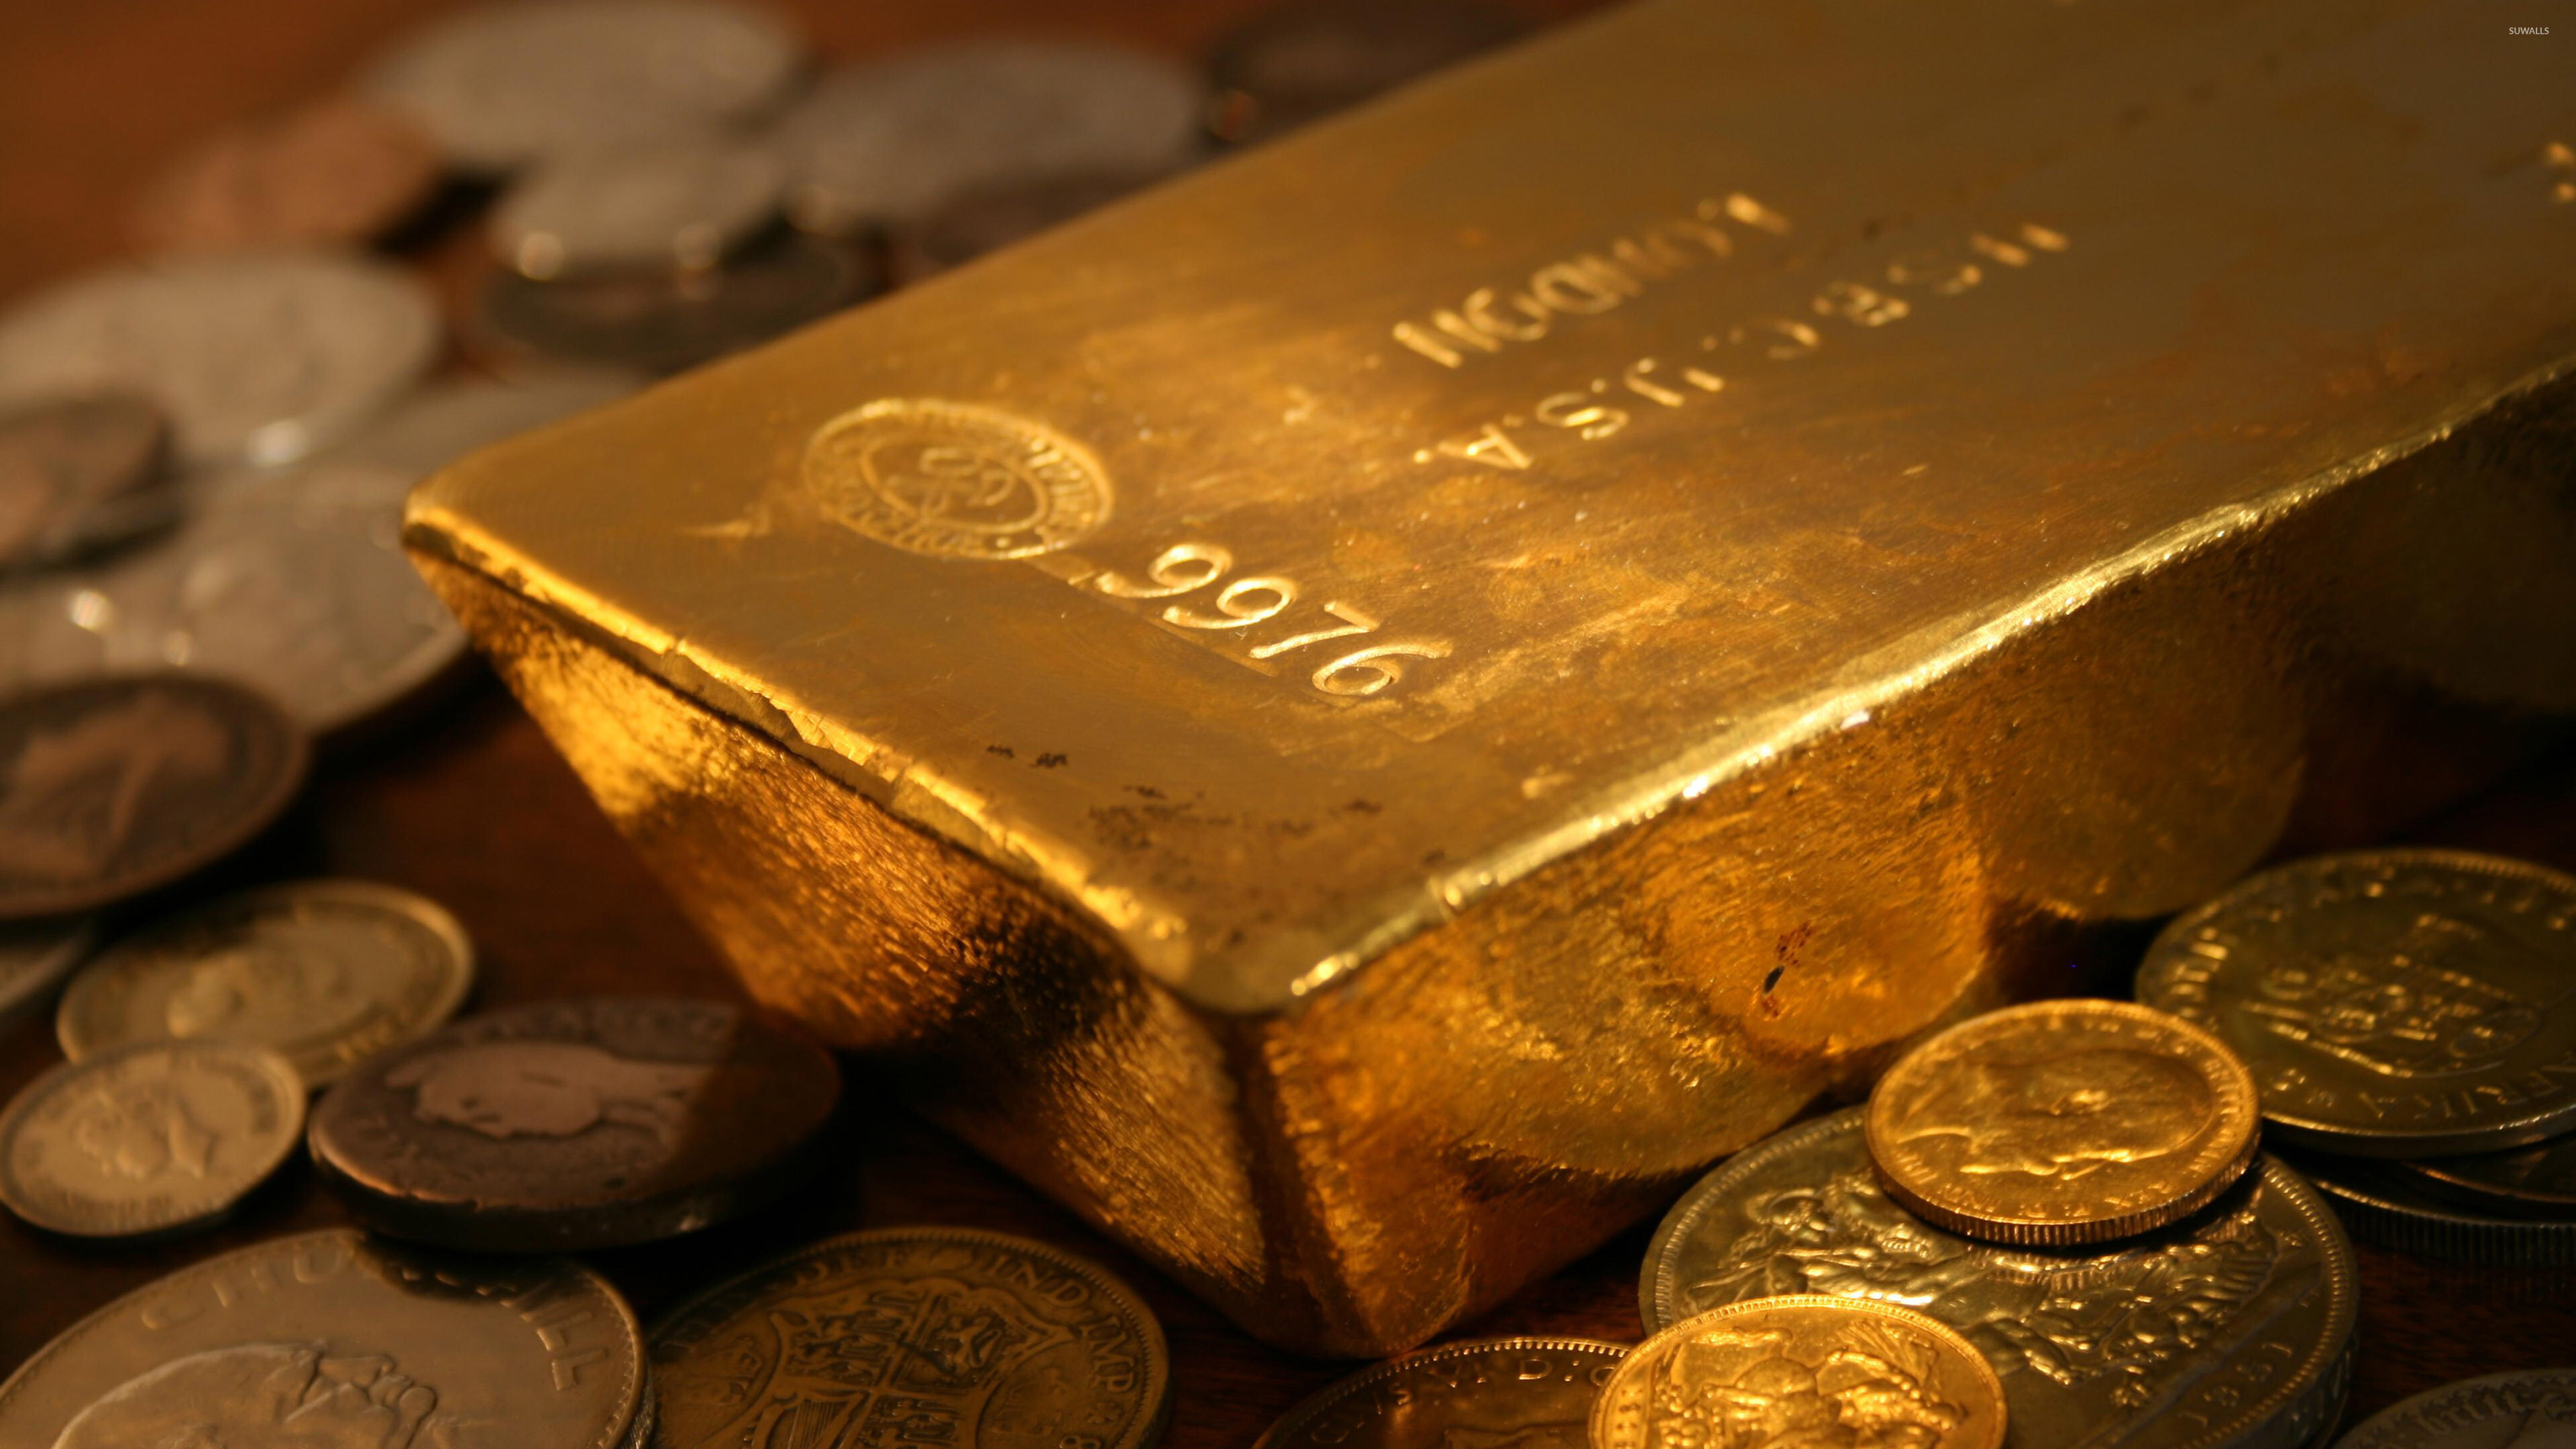 Gold Coins: A gold bar with the mint marks, A bulk quantity of precious metal, Currency. 3840x2160 4K Background.